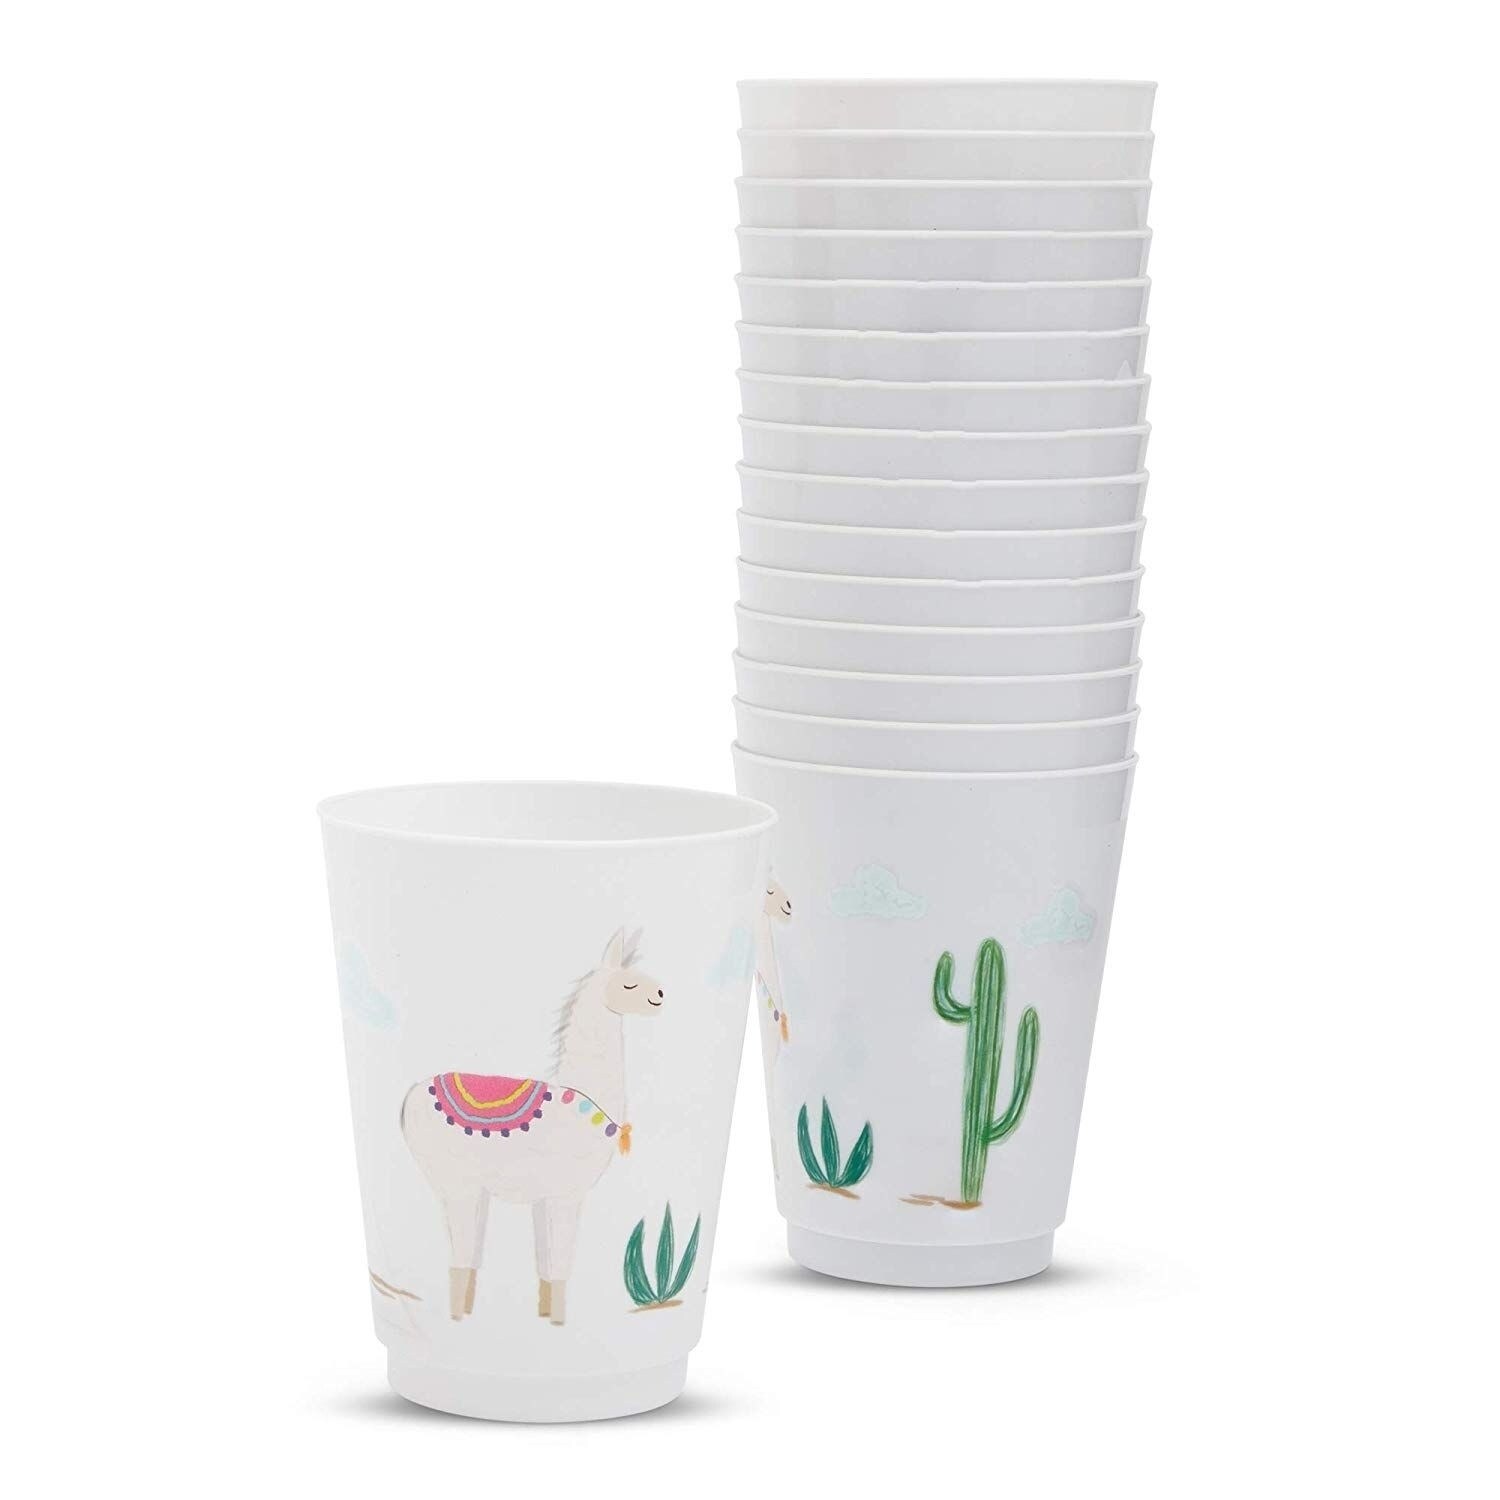 https://ak1.ostkcdn.com/images/products/31094361/16-Pack-Reusable-Party-Cups-Llama-Cactus-Plastic-9-oz-Cup-for-Kids-Birthday-Parties-White-292c53e2-c3df-4eb4-820f-a0017dc379bf.jpg